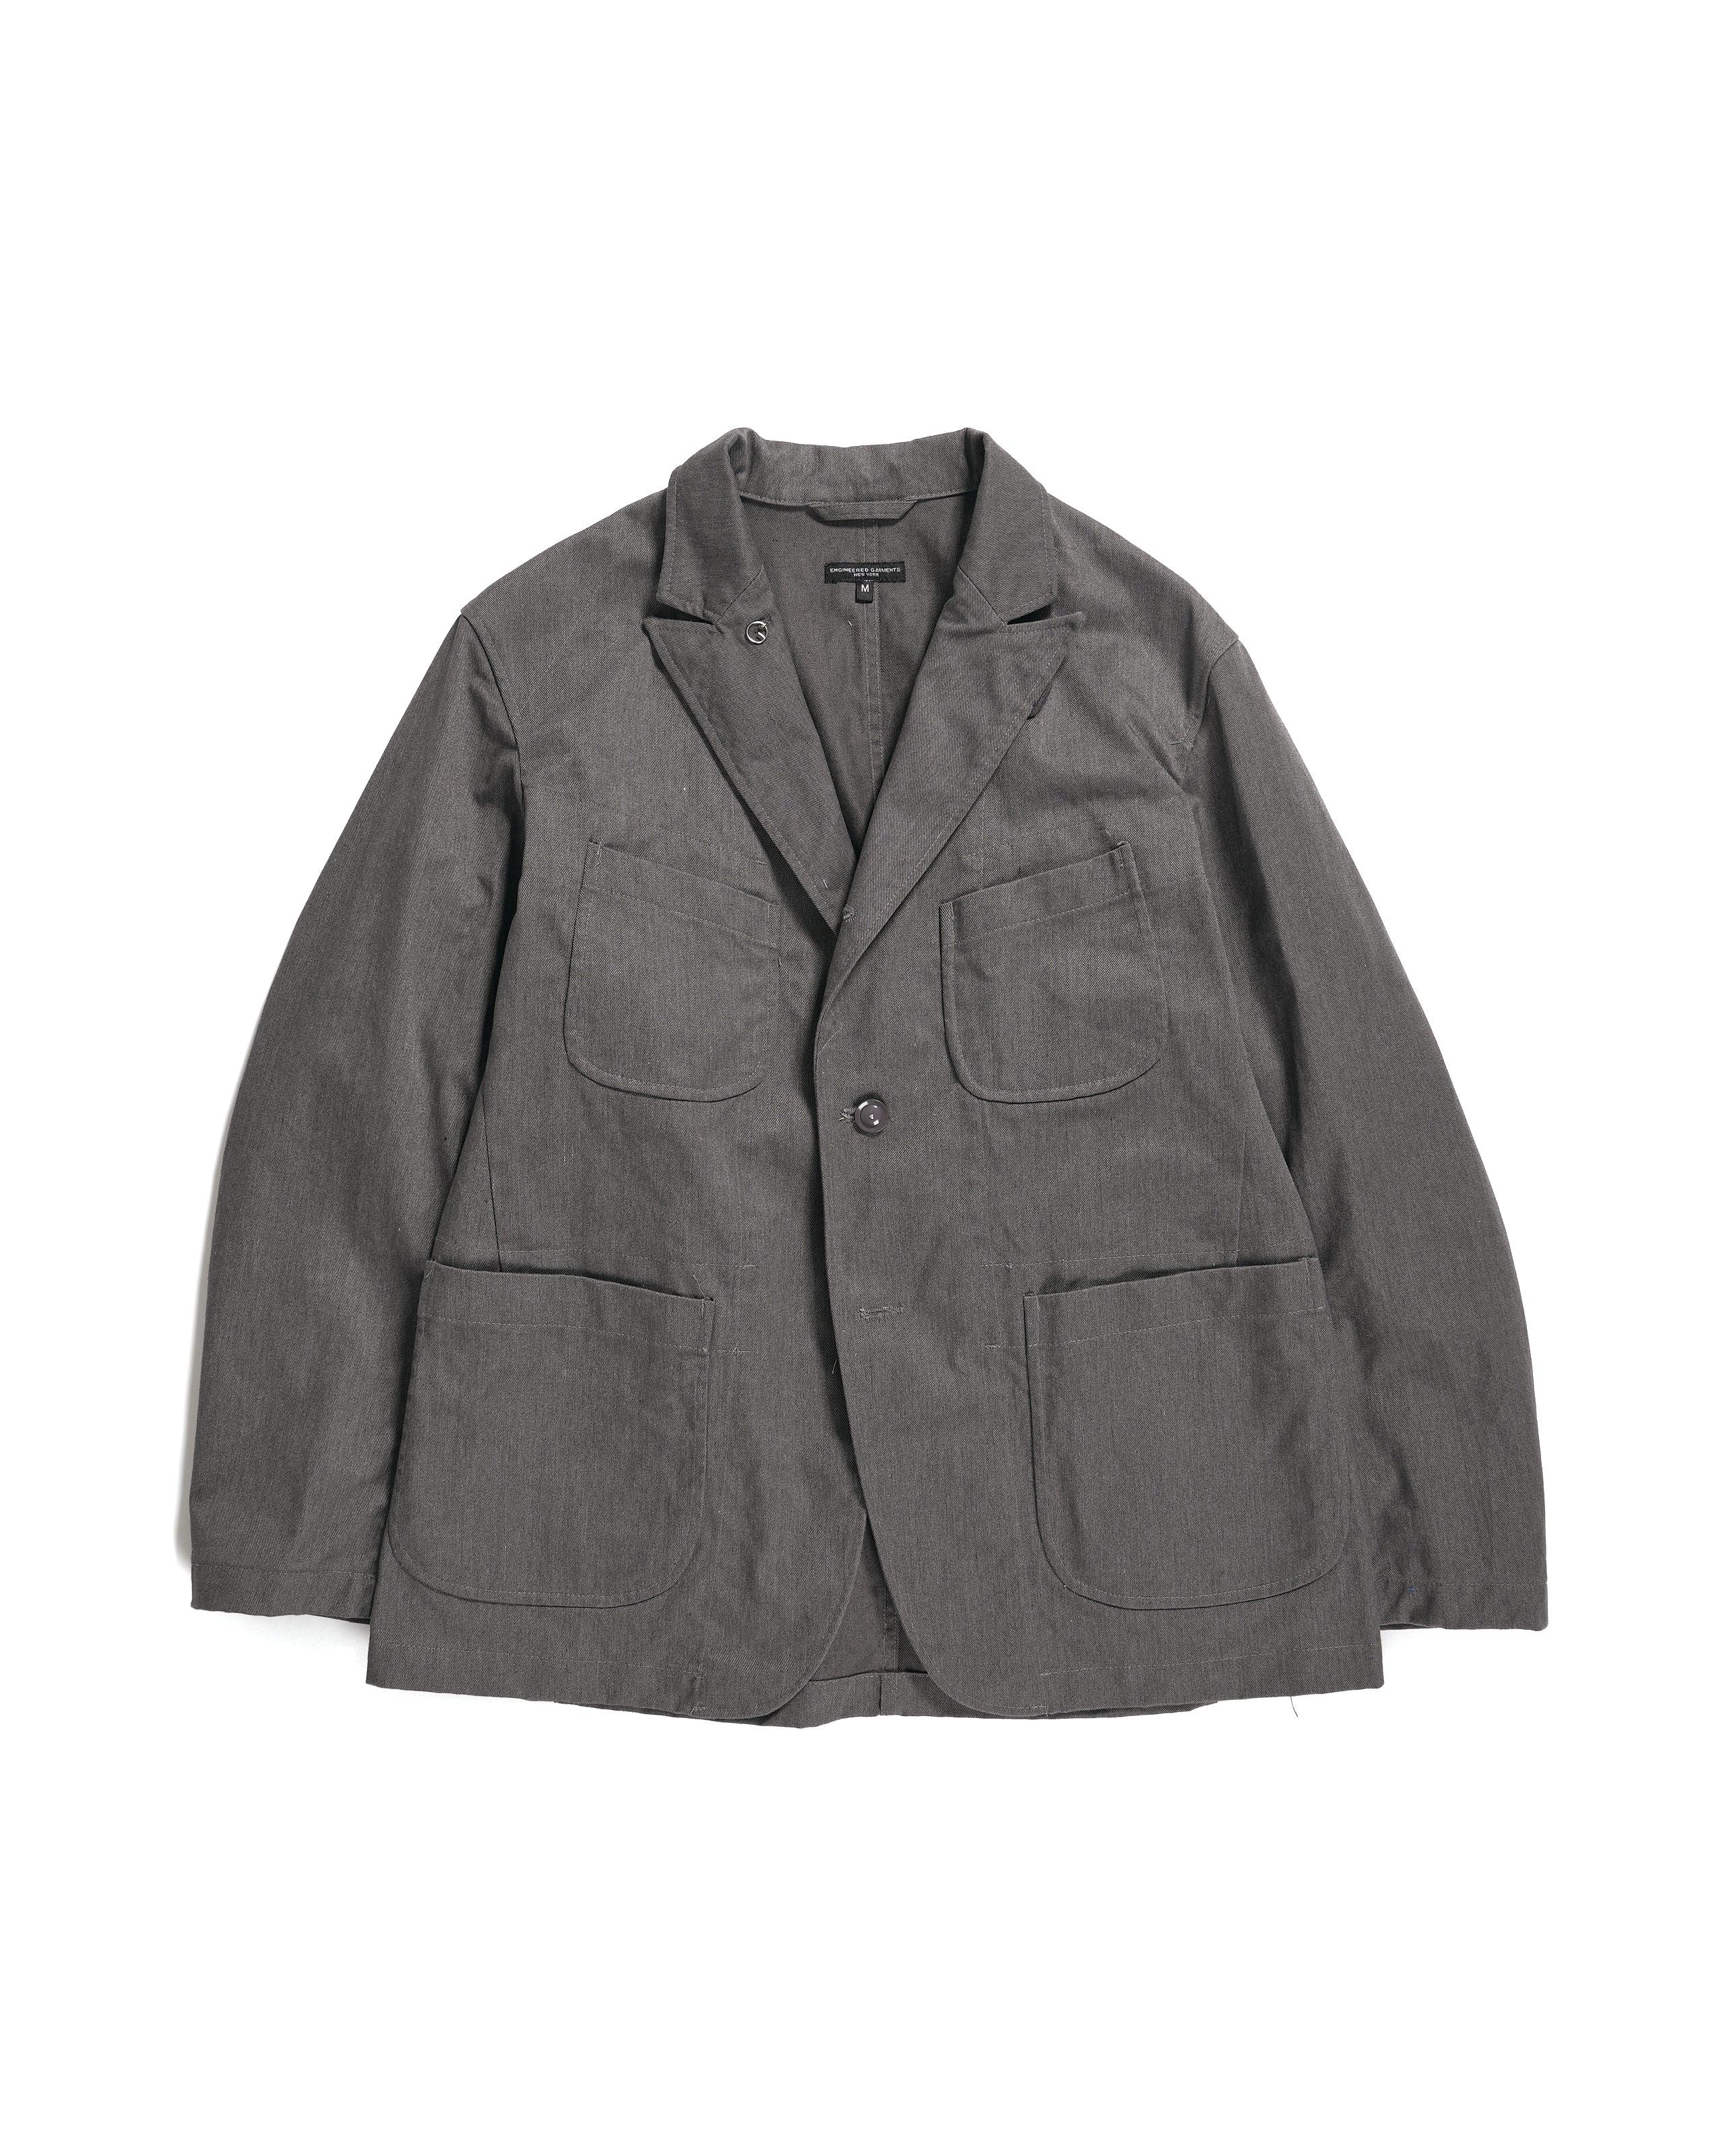 Engineered Garments Enginnered Garments Bedford Jacket in Gray for